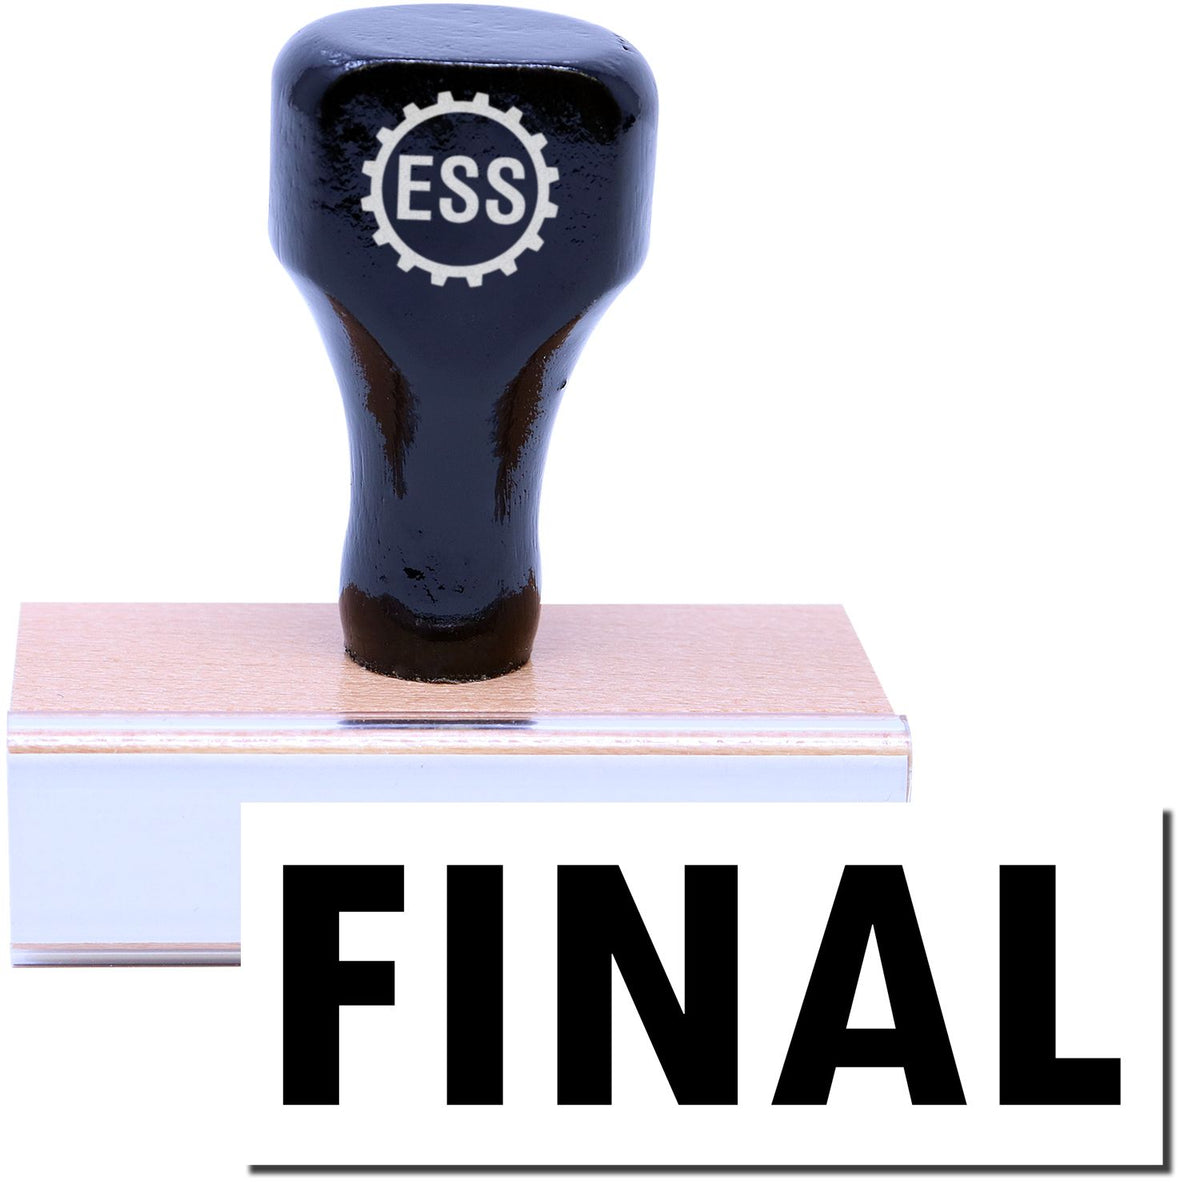 A stock office rubber stamp with a stamped image showing how the text &quot;FINAL&quot; in a large font is displayed after stamping.